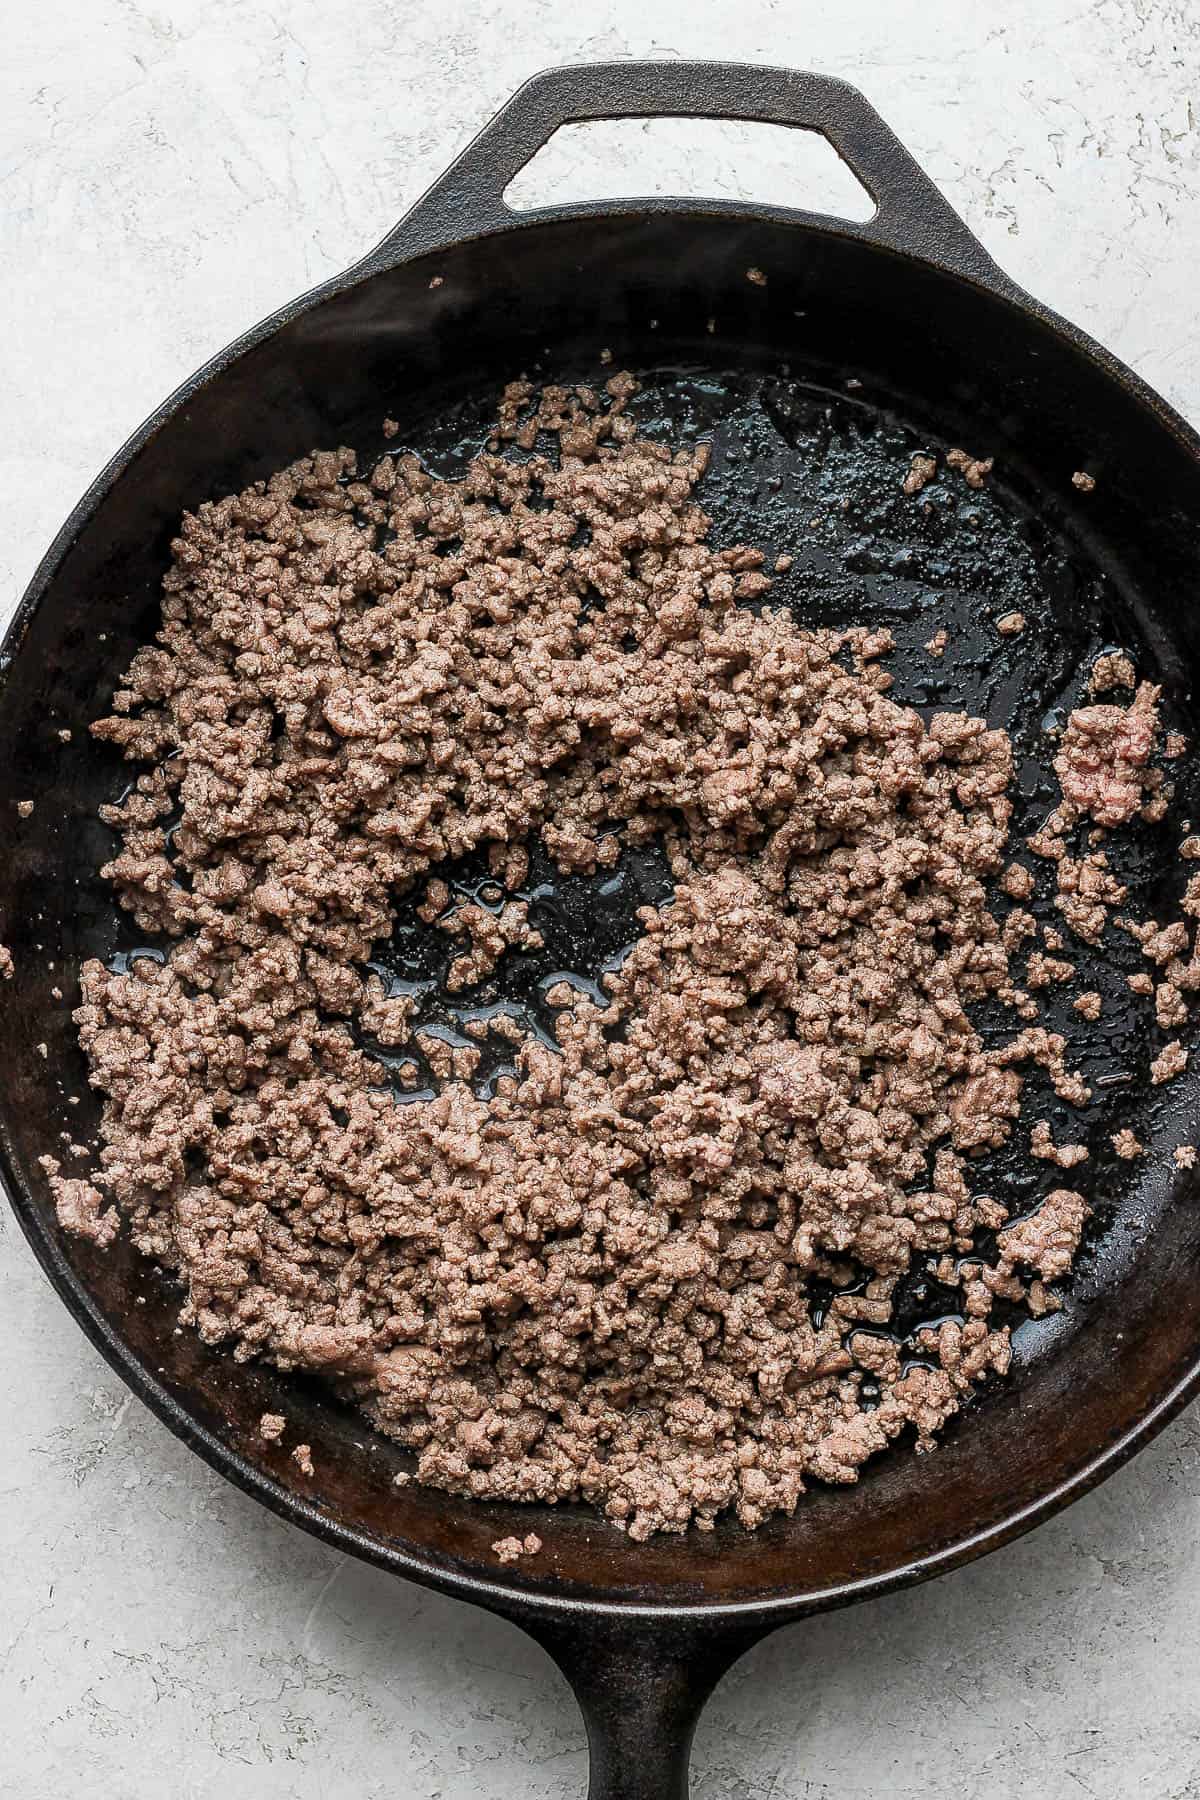 A pound of ground beef being browned in a cast iron skillet.